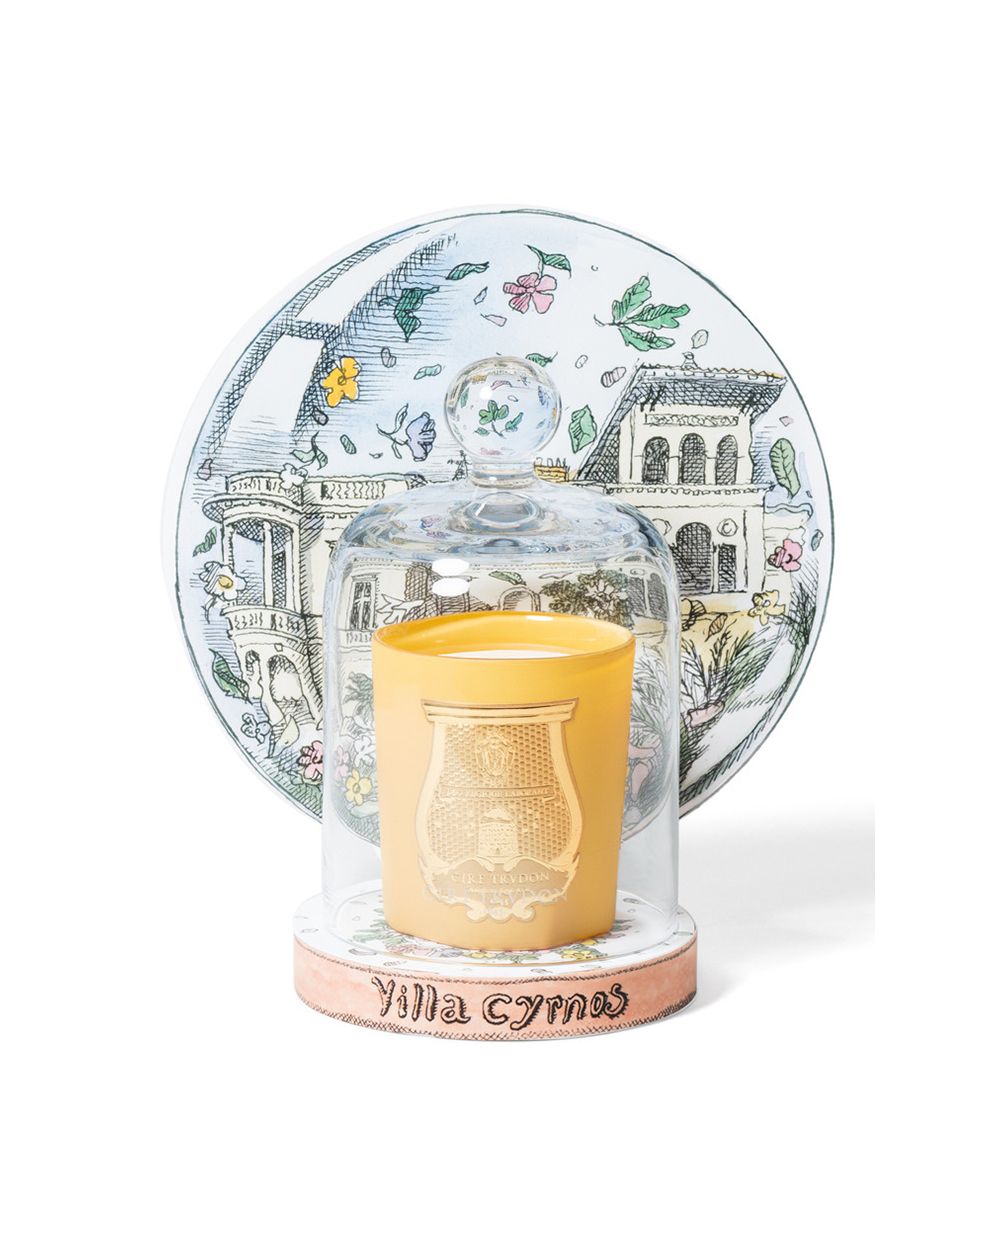 Cire Trudon Limited Edition Candle, $169, from WORLD